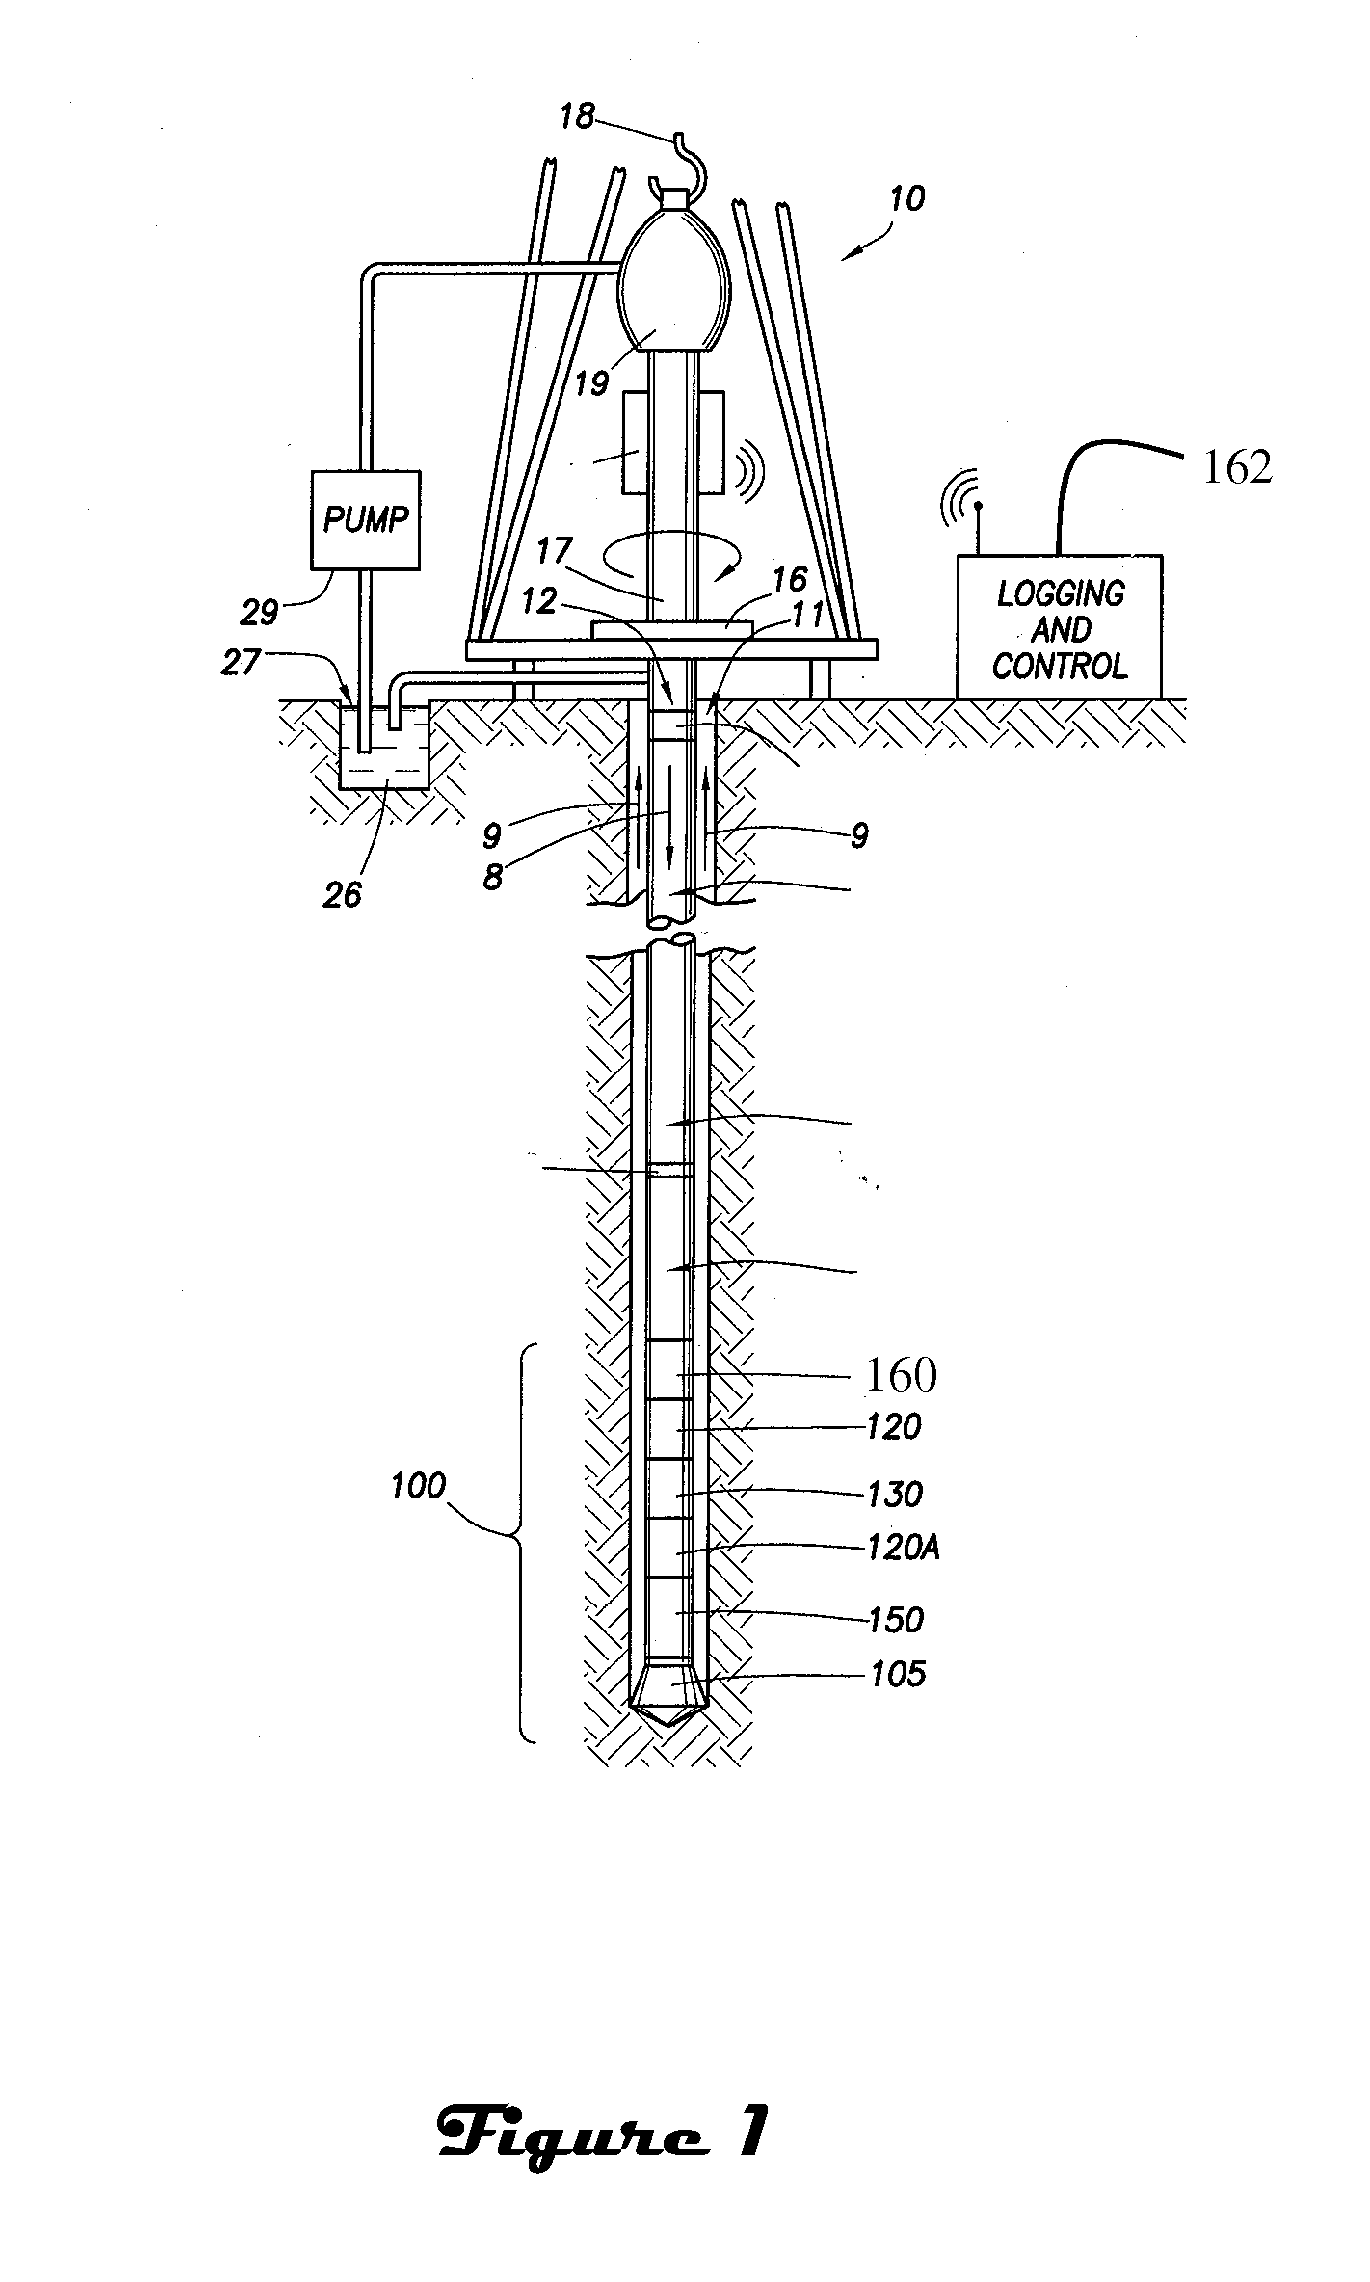 Electromagnetic device having compact flux paths for harvesting energy from vibrations